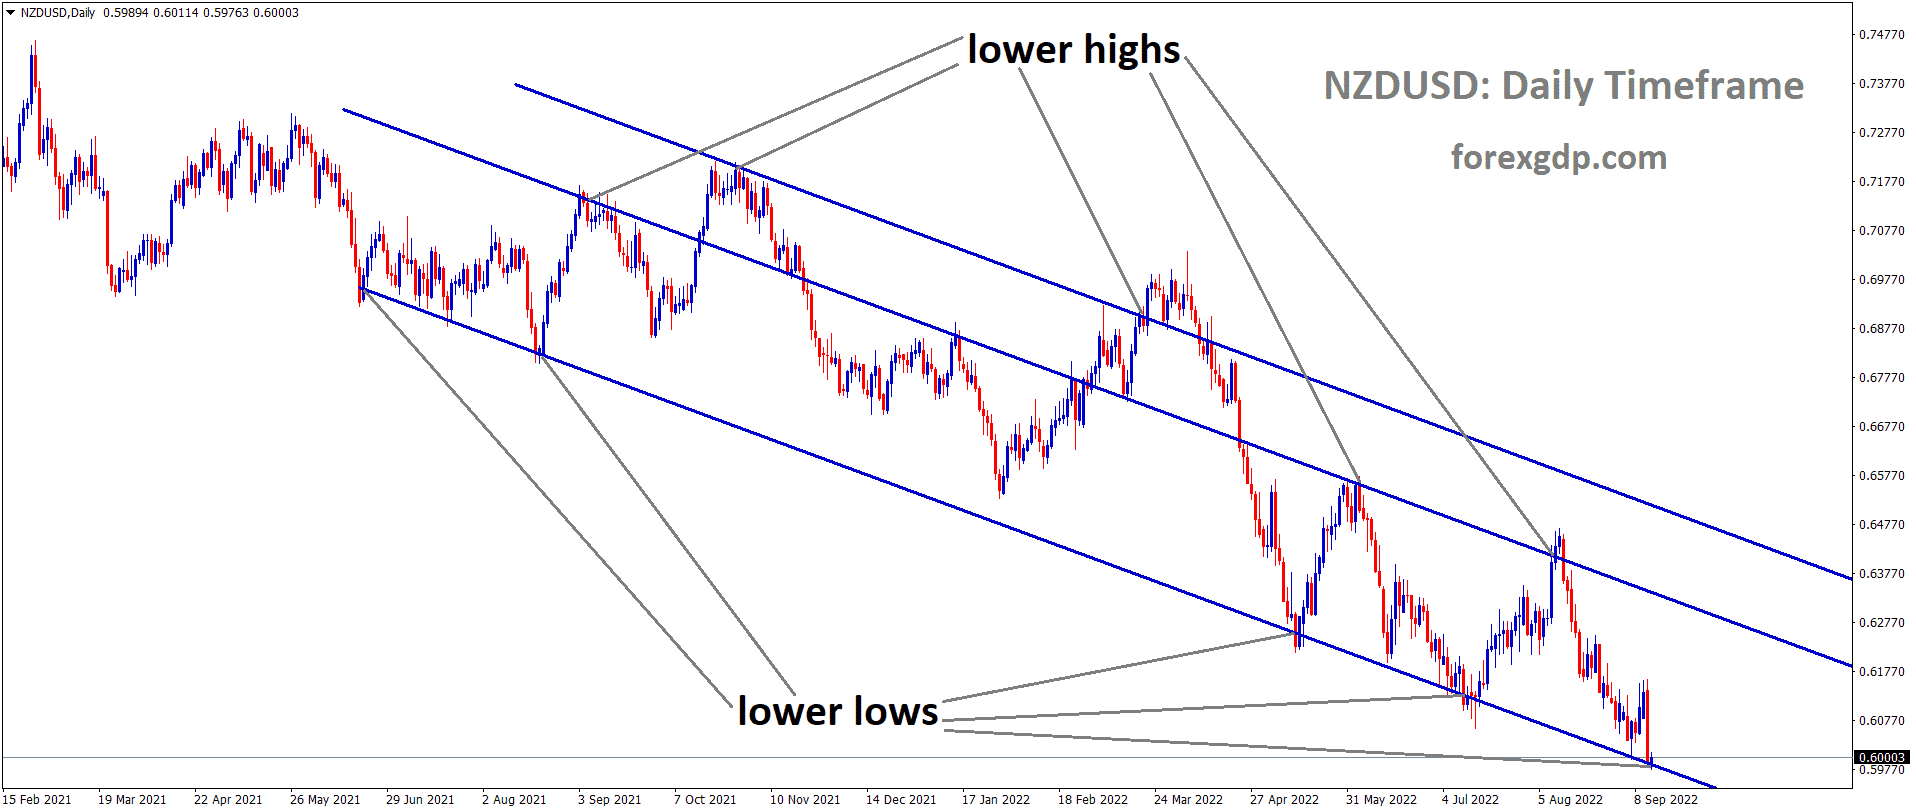 NZDUSD is moving in a Descending channel and the market has rebounded from the Lower Low area of the channel